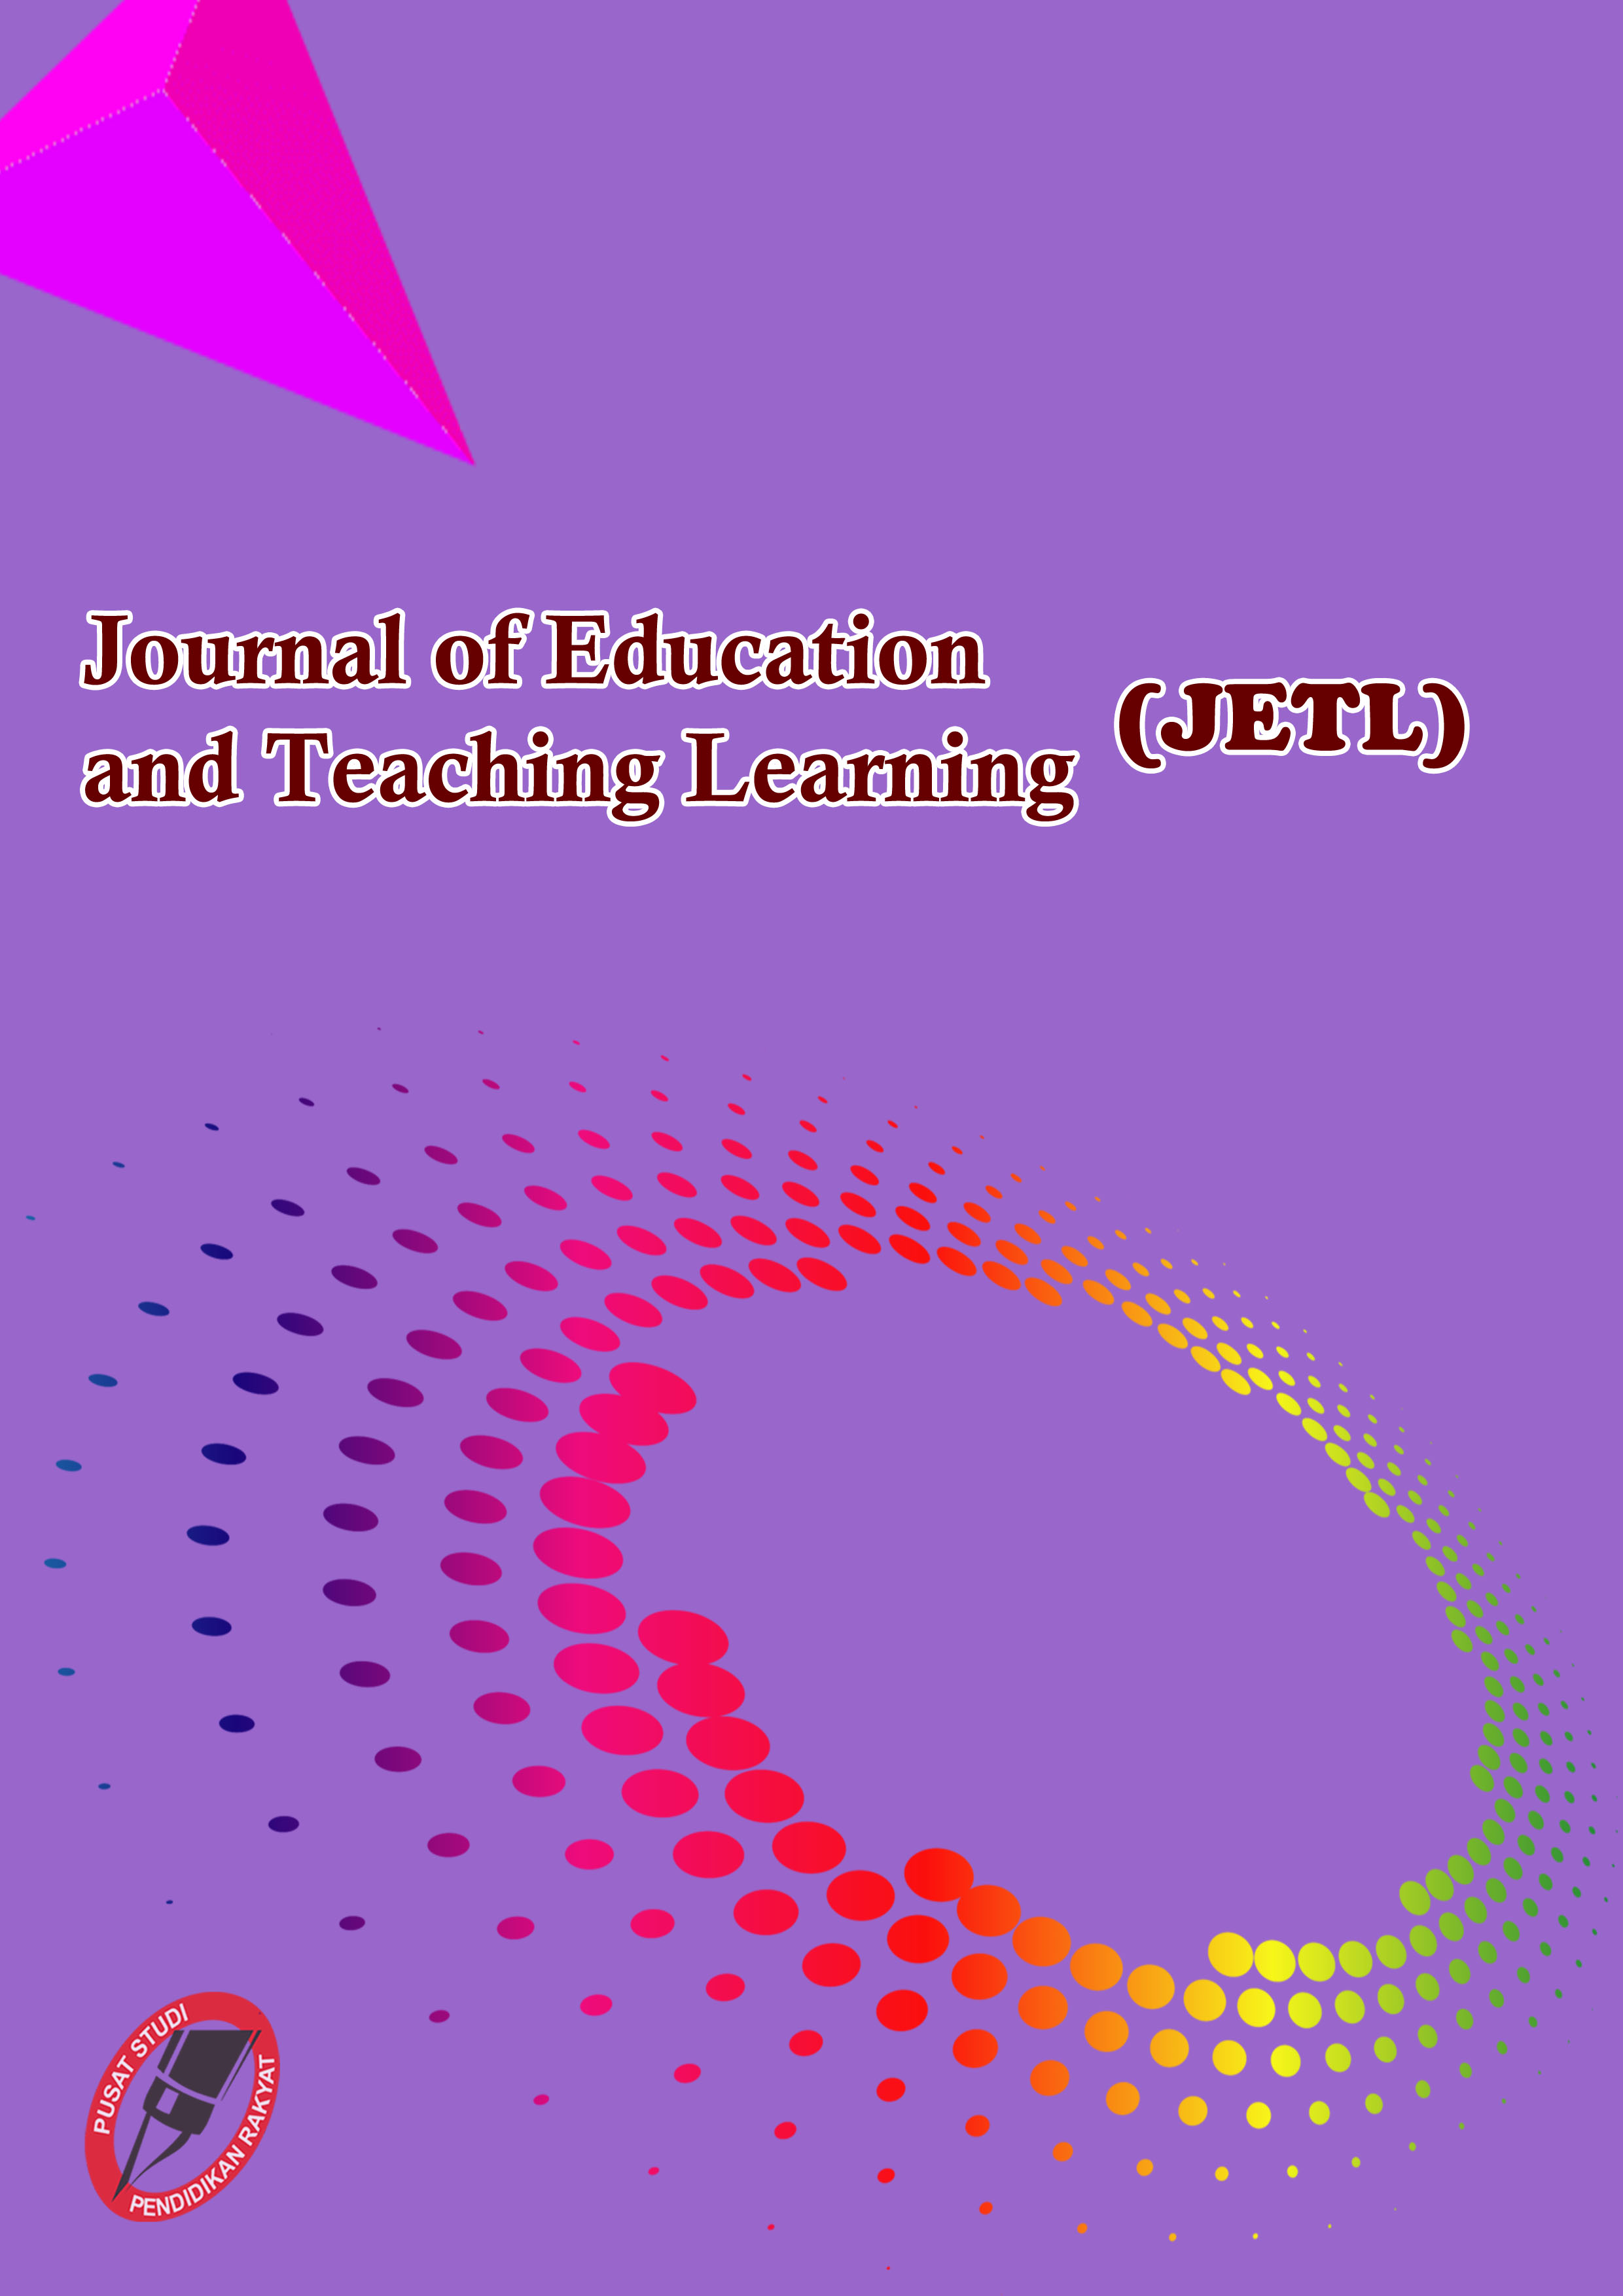 					View Vol. 3 No. 2 (2021): Journal of Education and Teaching Learning (JETL)
				